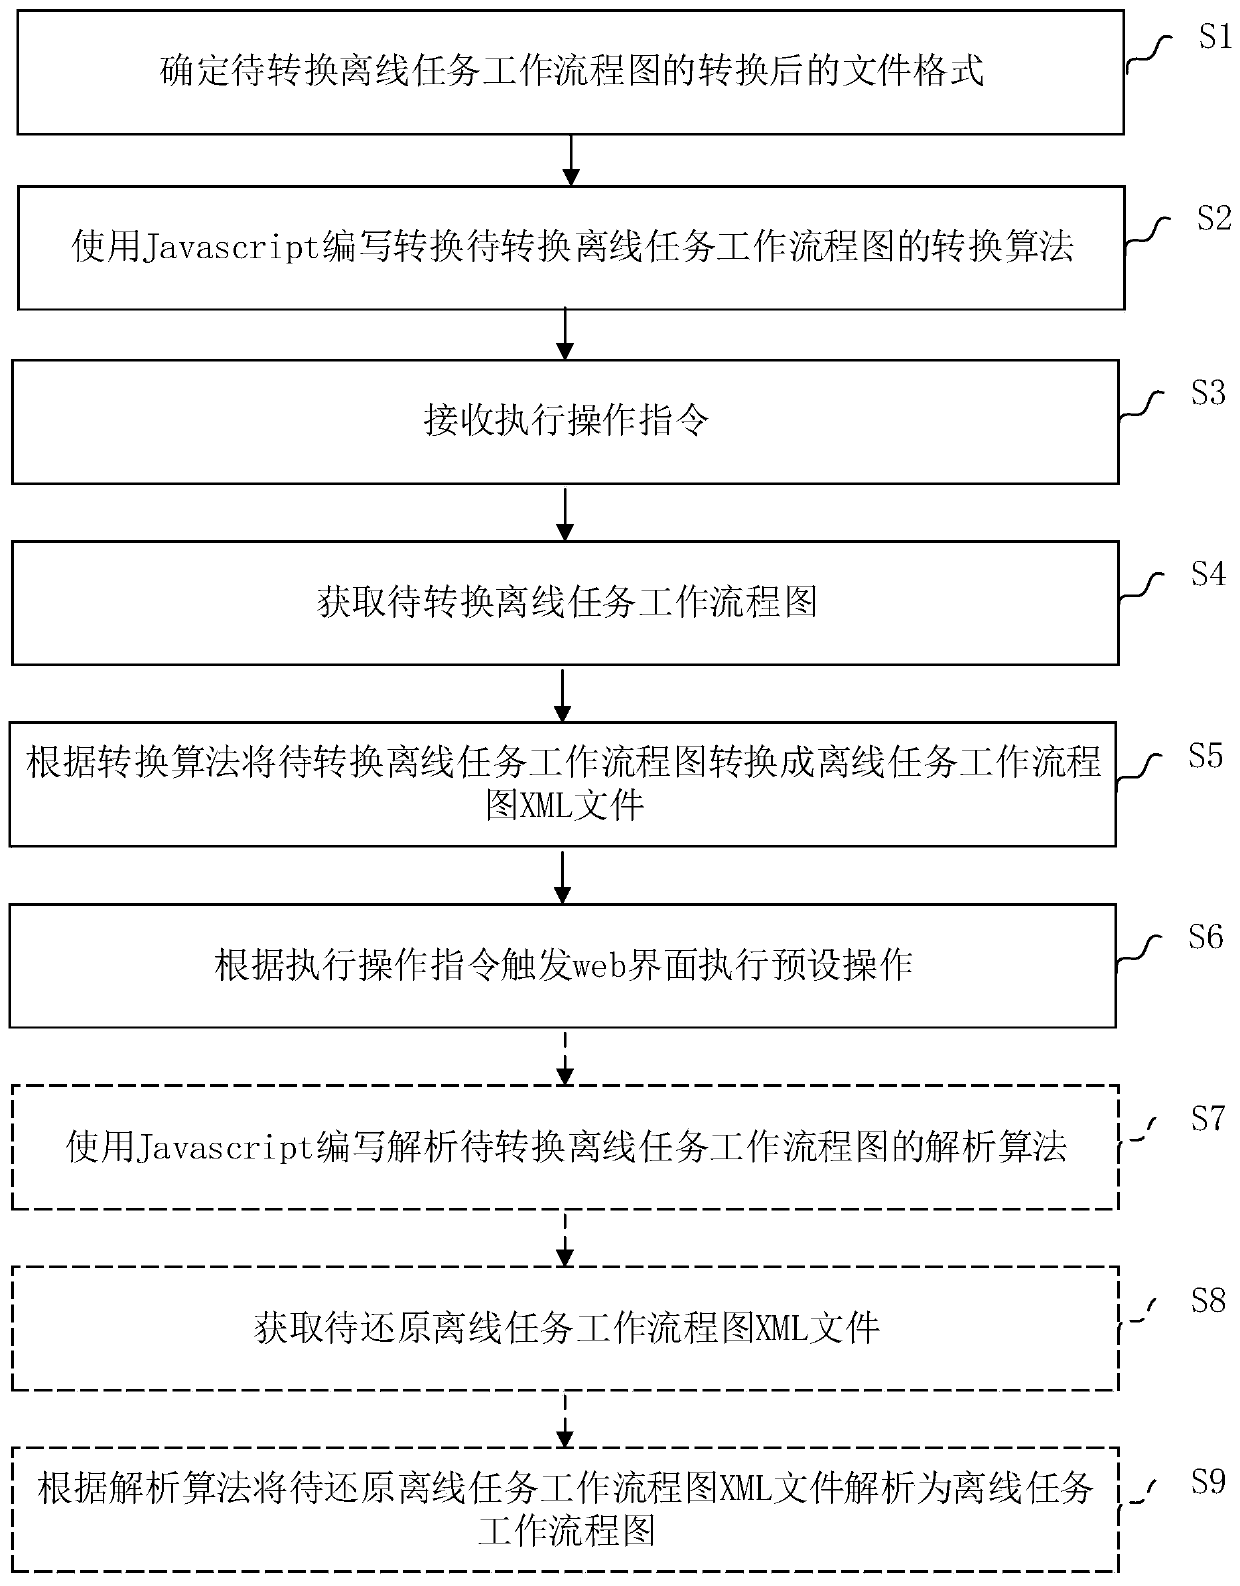 Method and device for storing offline task workflows by using XML